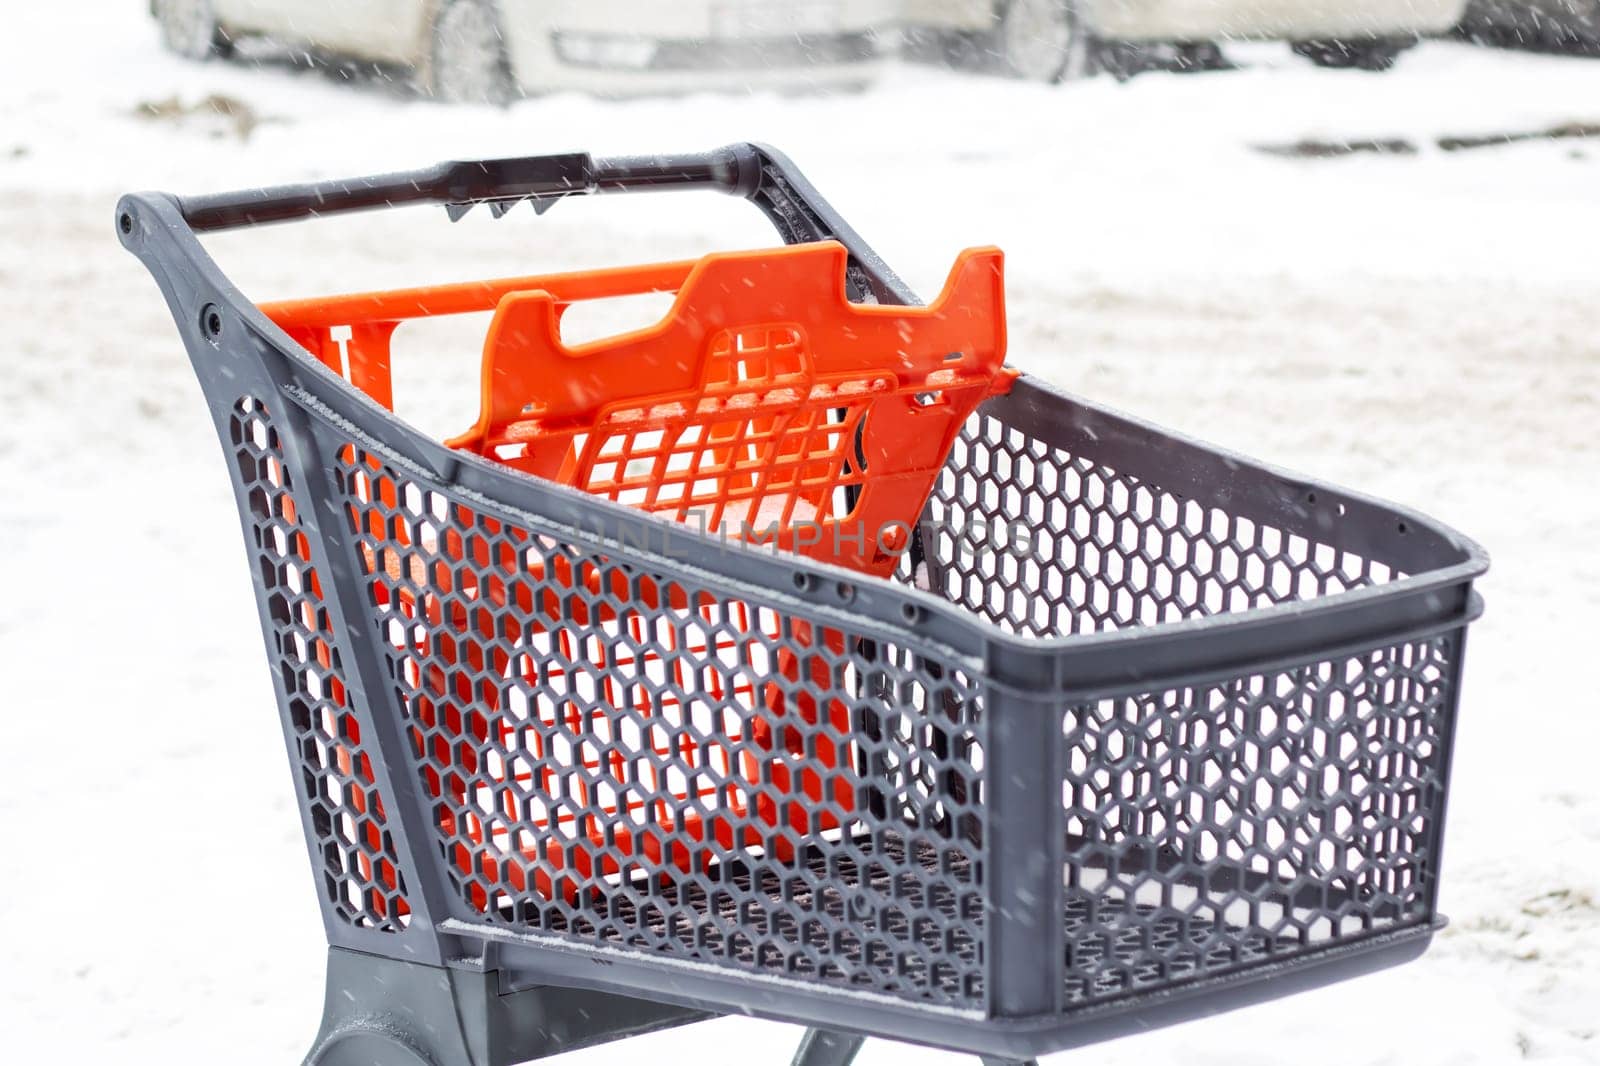 Shopping cart for outdoor shopping in the snow by Vera1703